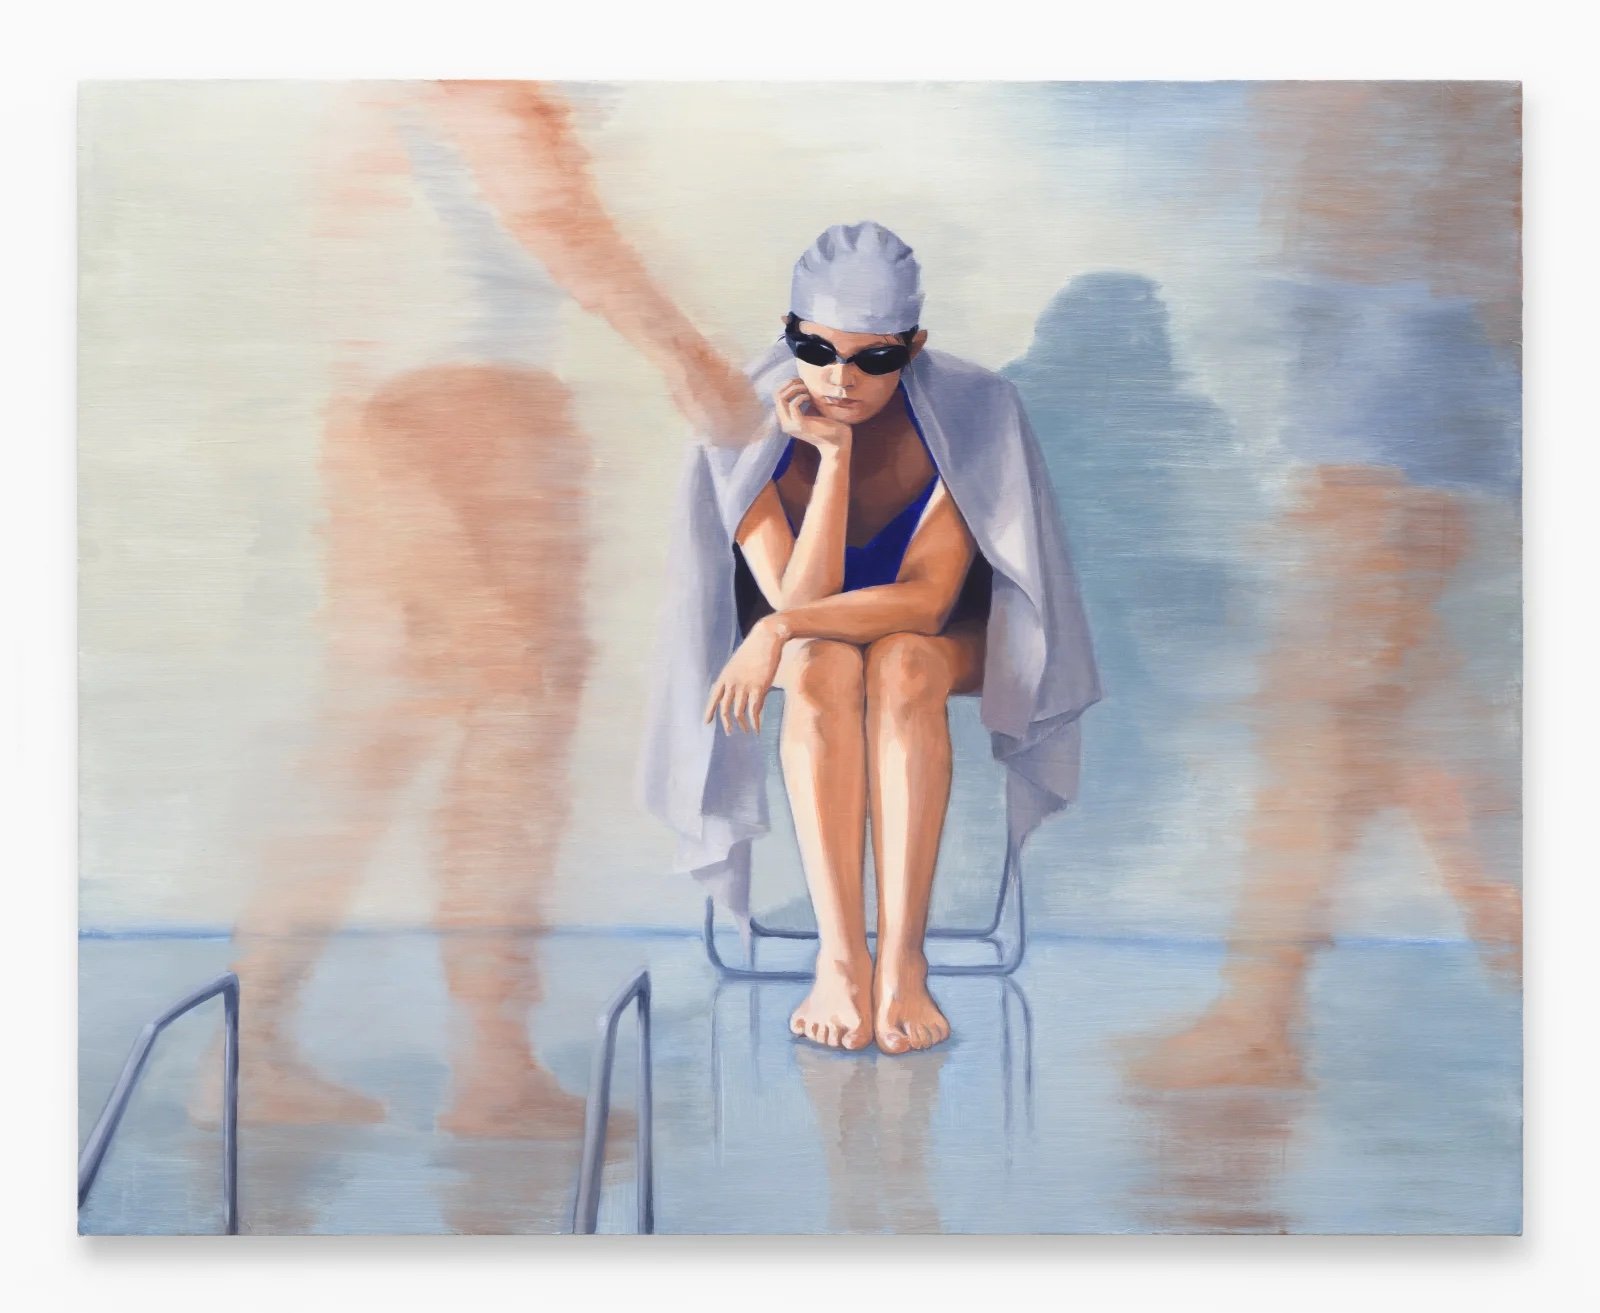  Yuri Yuan  Swim Class , 2021 Oil on canvas 48 x 60 in (121.9 x 152.4 cm) Courtesy of the Artist and Make Room 